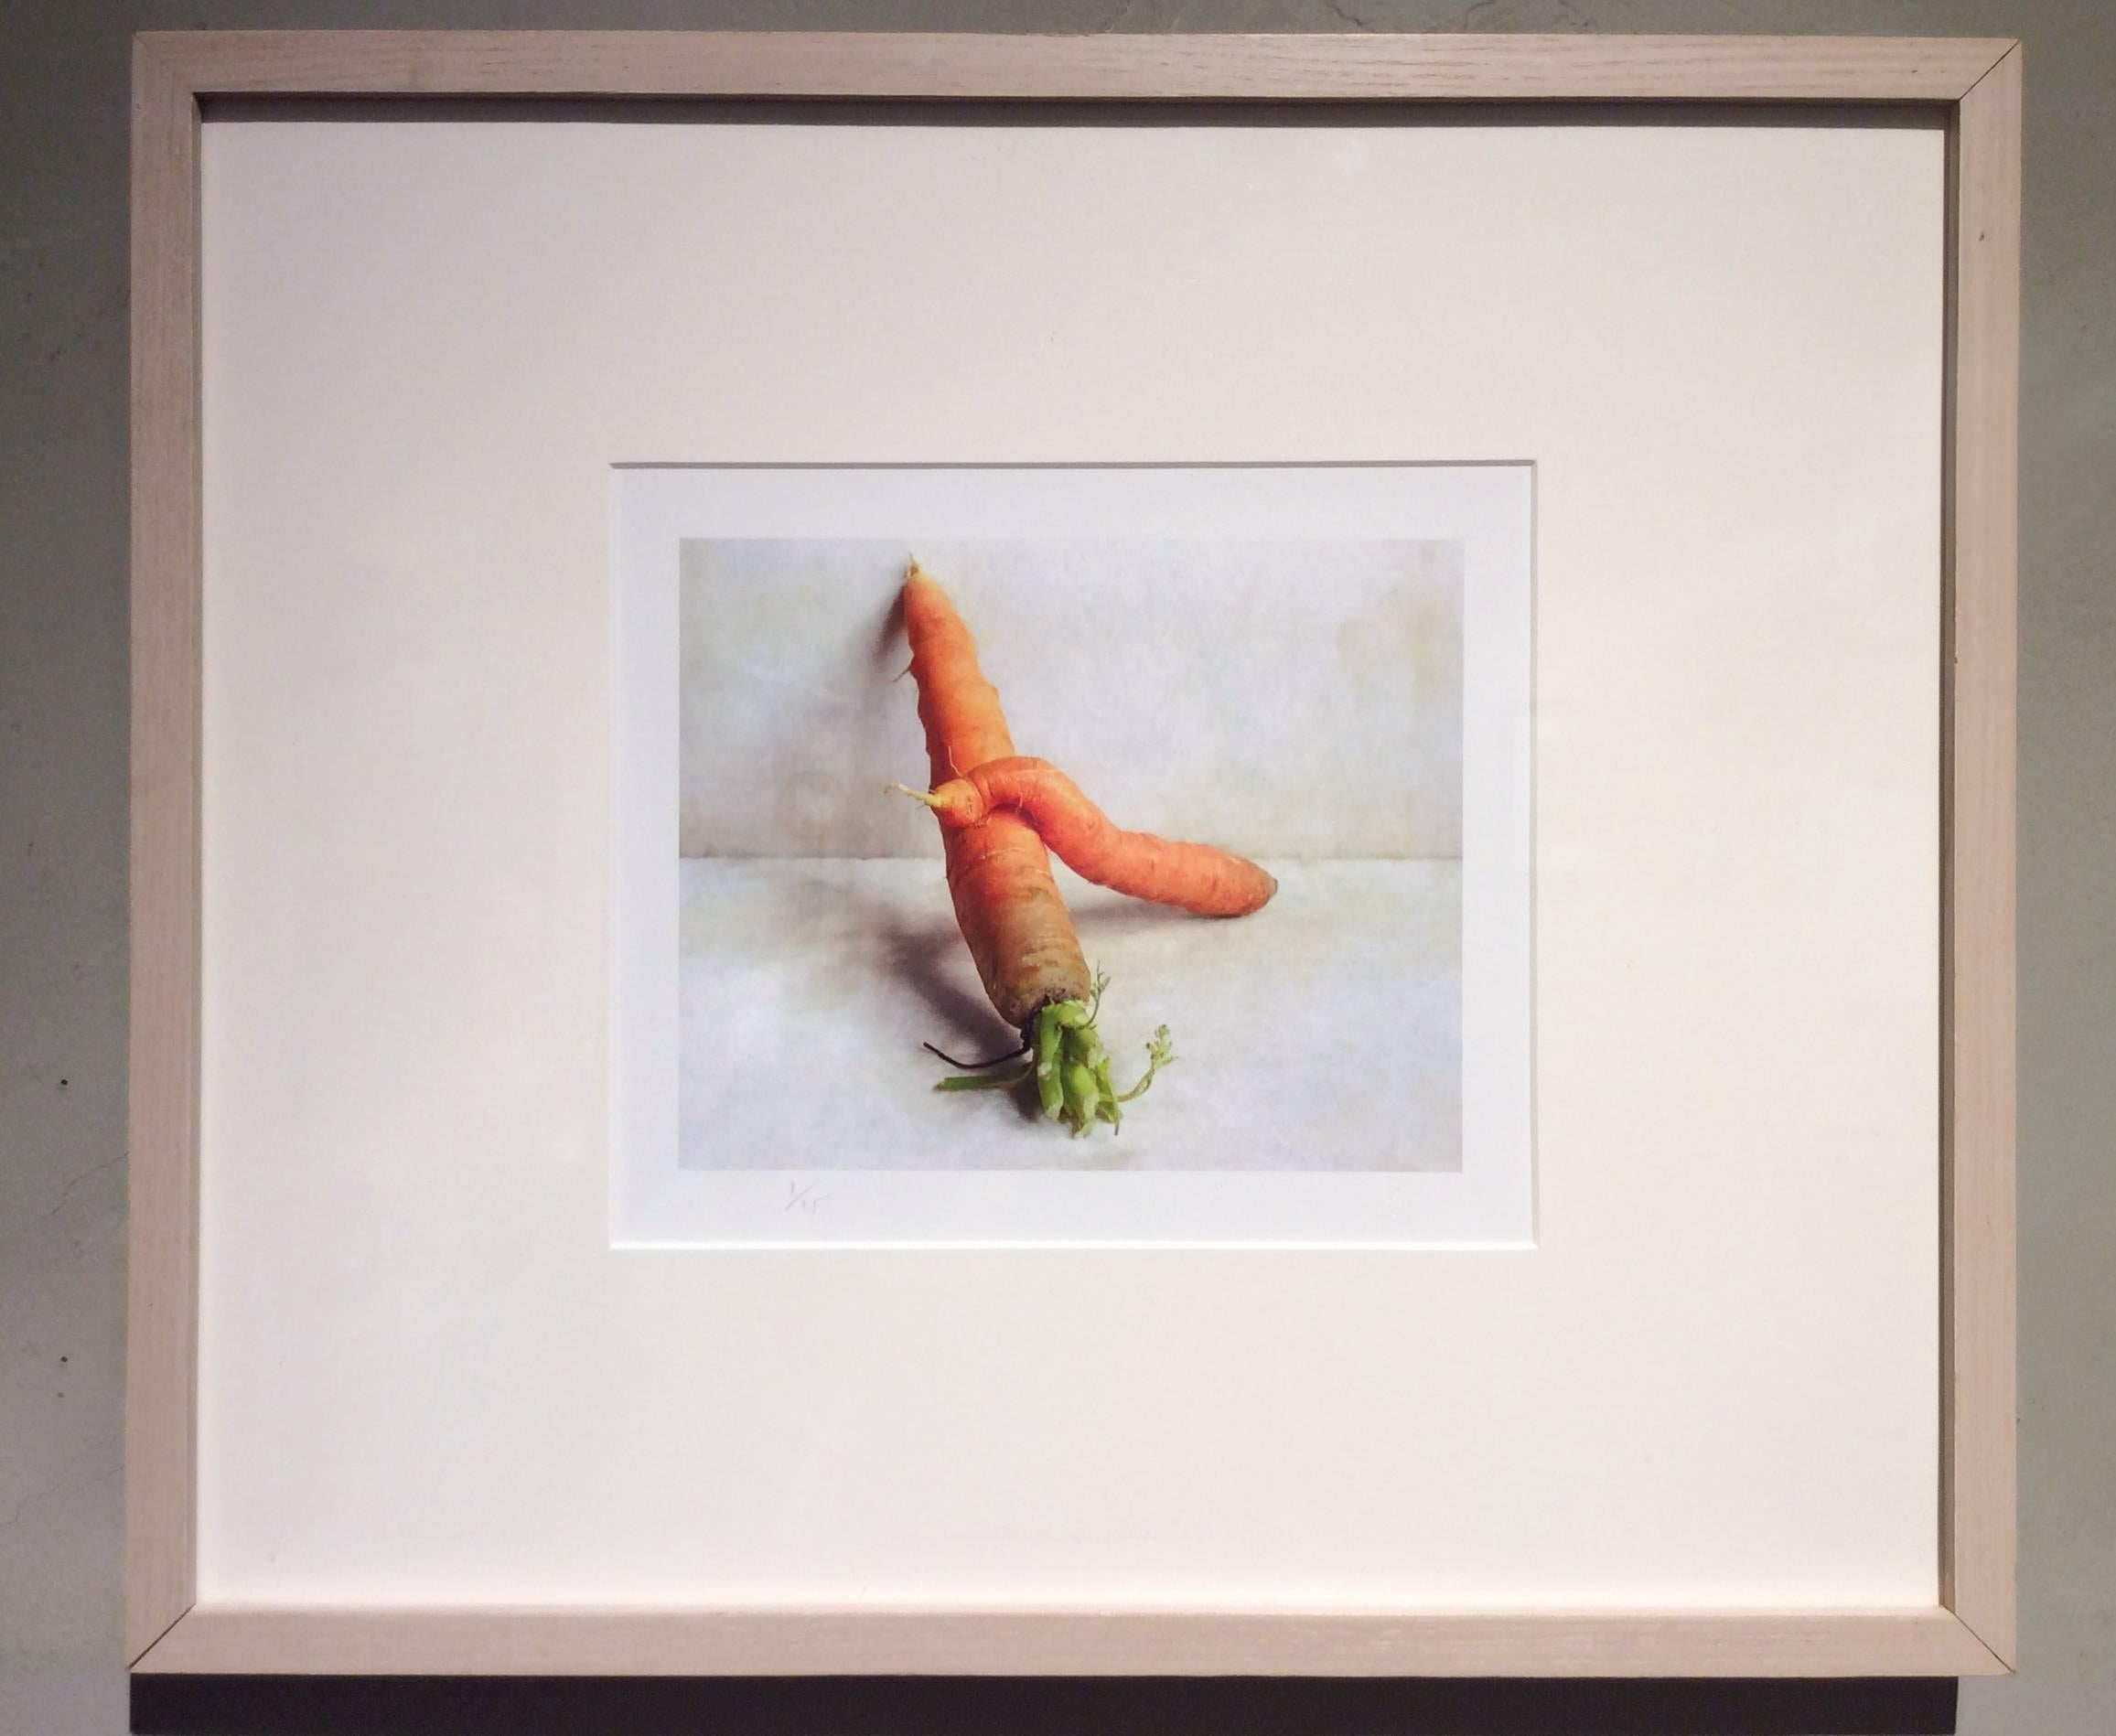 Carrots (Color Still Life Photograph of Orange Vegetable on White, Wood Frame) - Gray Color Photograph by David Halliday